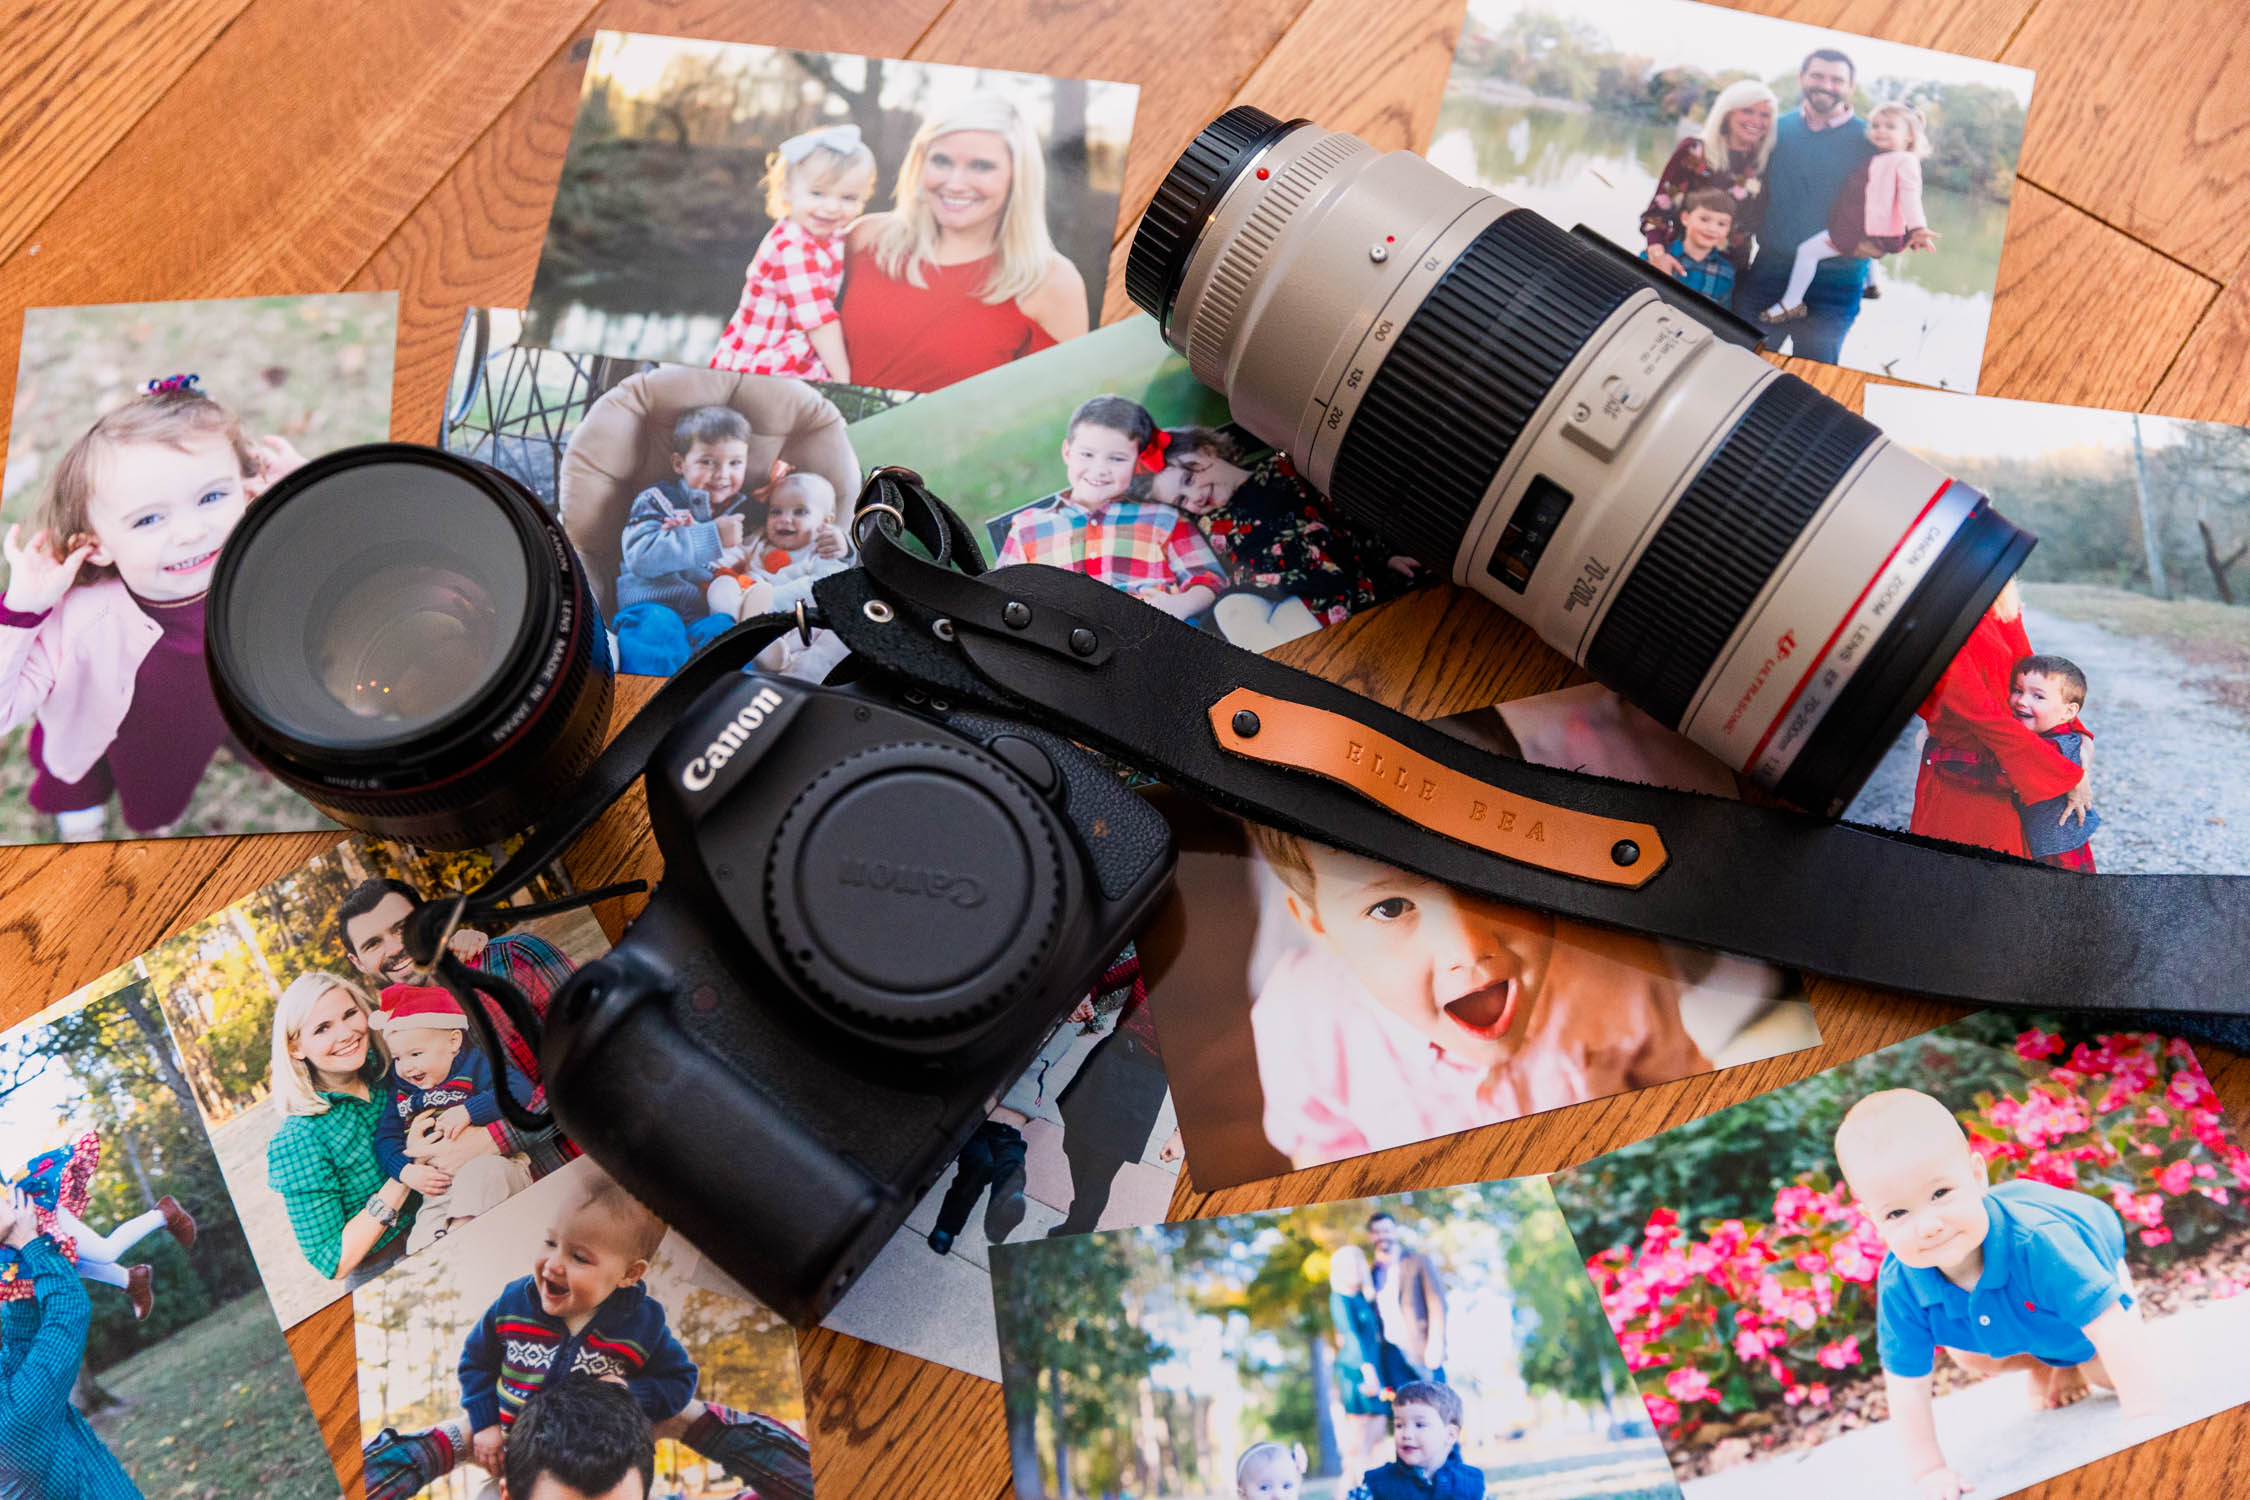 Printed family photos scattered across the floor underneath camera equipment